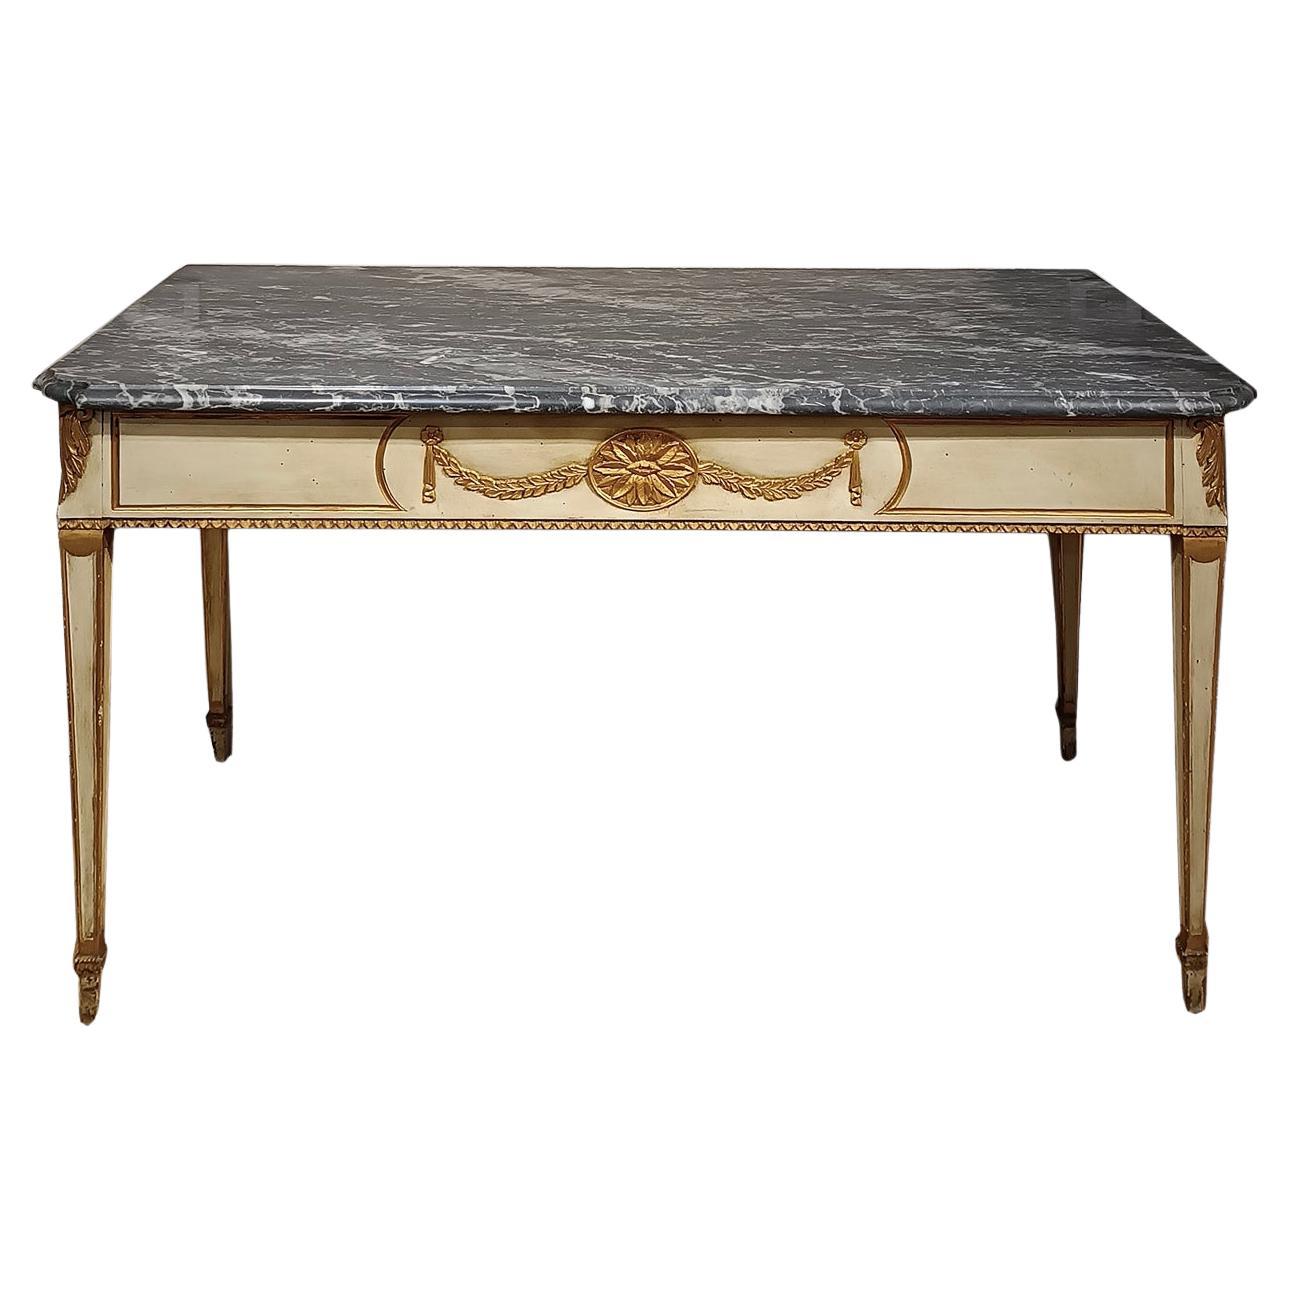 END OF THE 18th CENTURY NEOCLASSICAL CONSOLLE WITH GRAY BARDIGLIO MARBLE